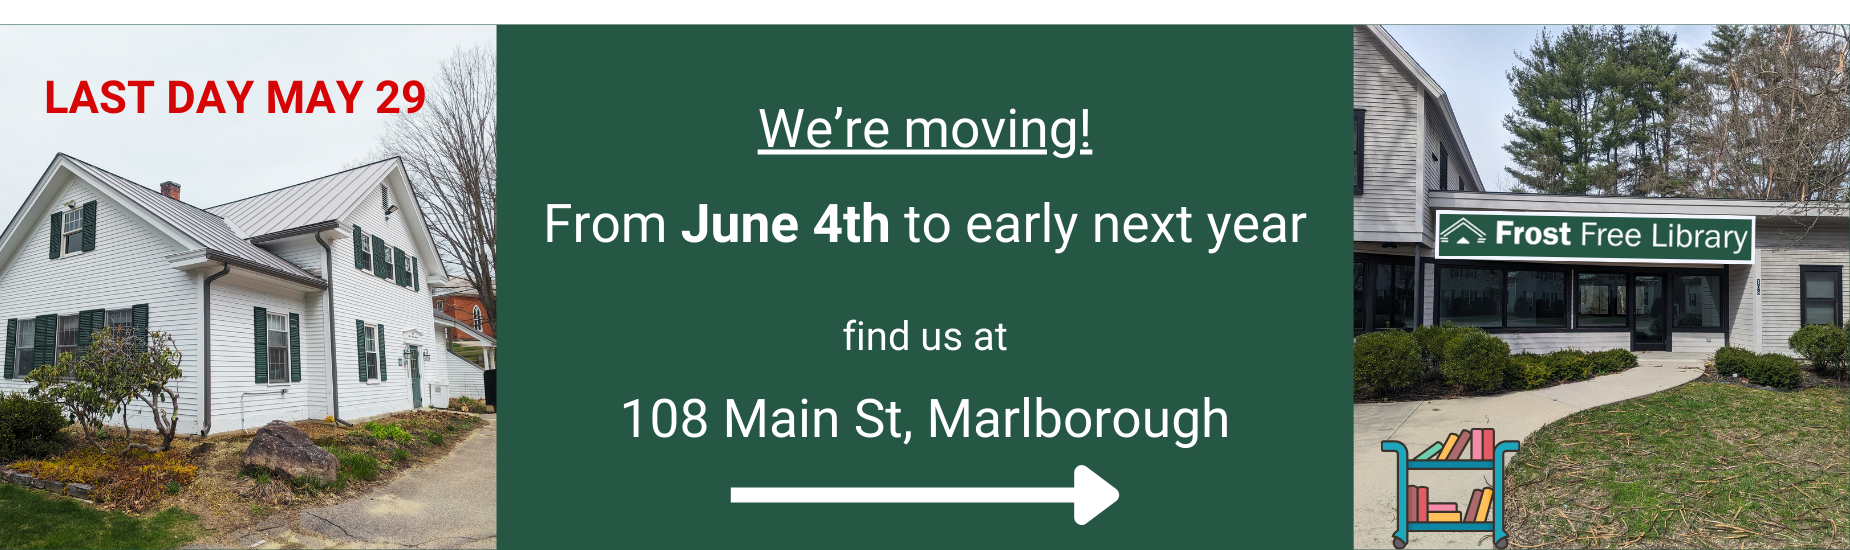 The library is moving May 30 - June 1. New location 108 Main St